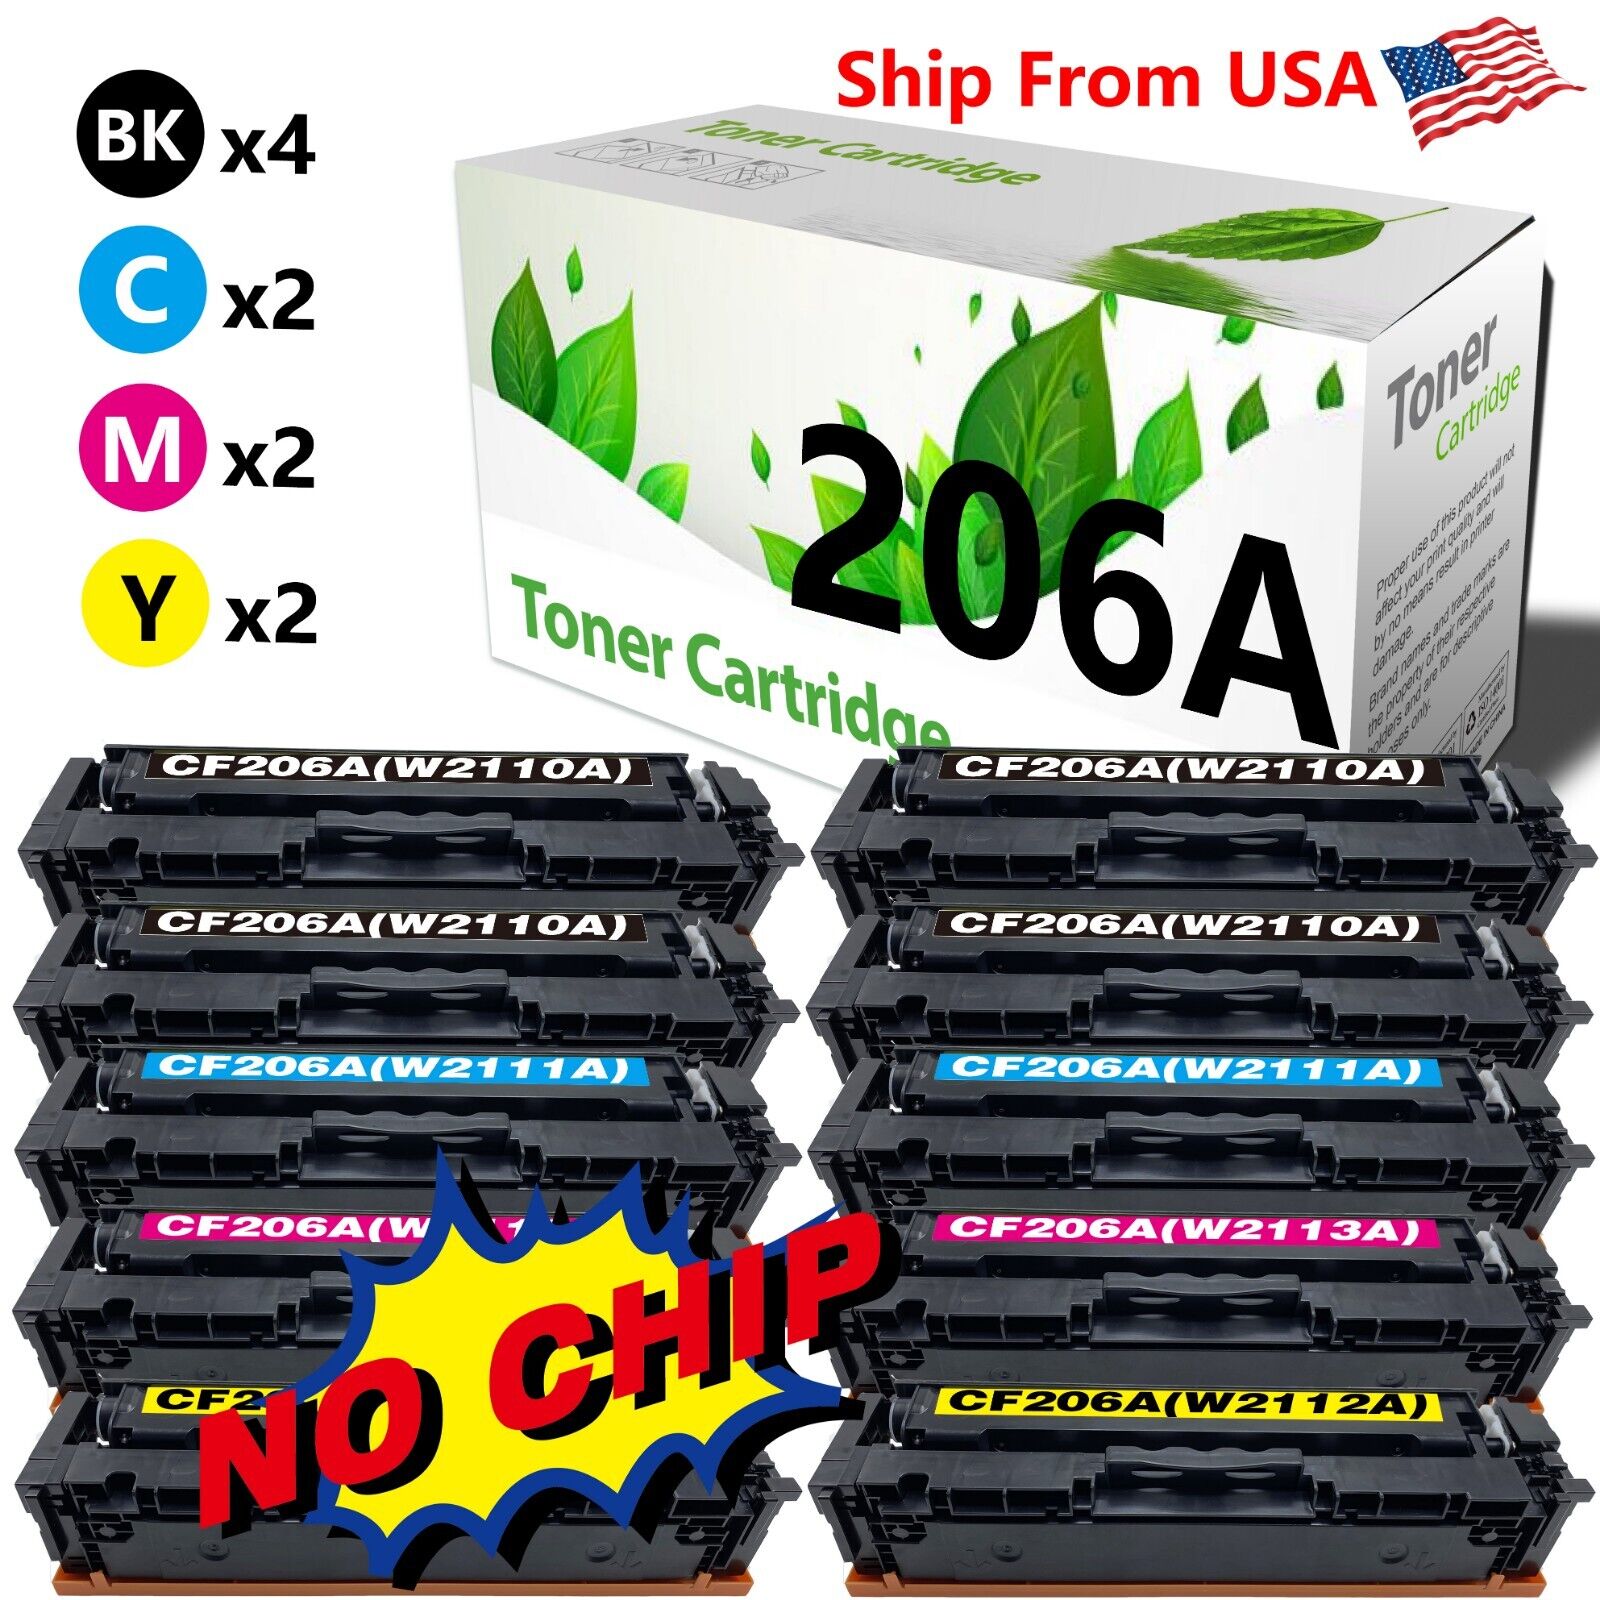 10Pack CF206A Toner Cartridges W2110A-13A no chip for M282nw M283fdn M283fdw